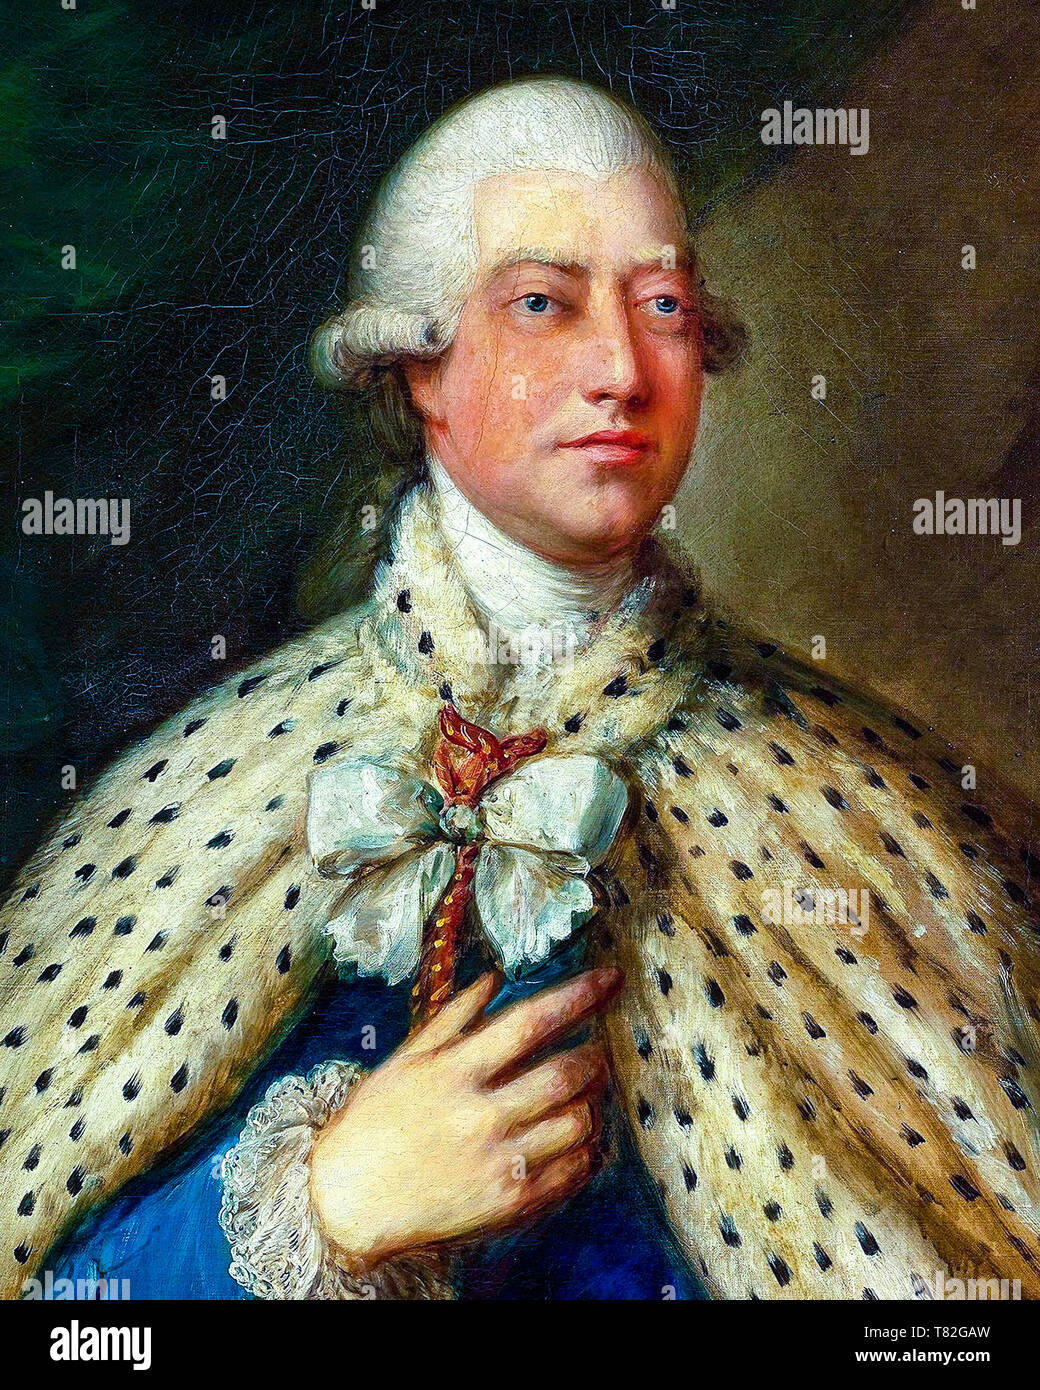 George III of the United Kingdom, portrait by Thomas Gainsborough (detail), 1785 Stock Photo